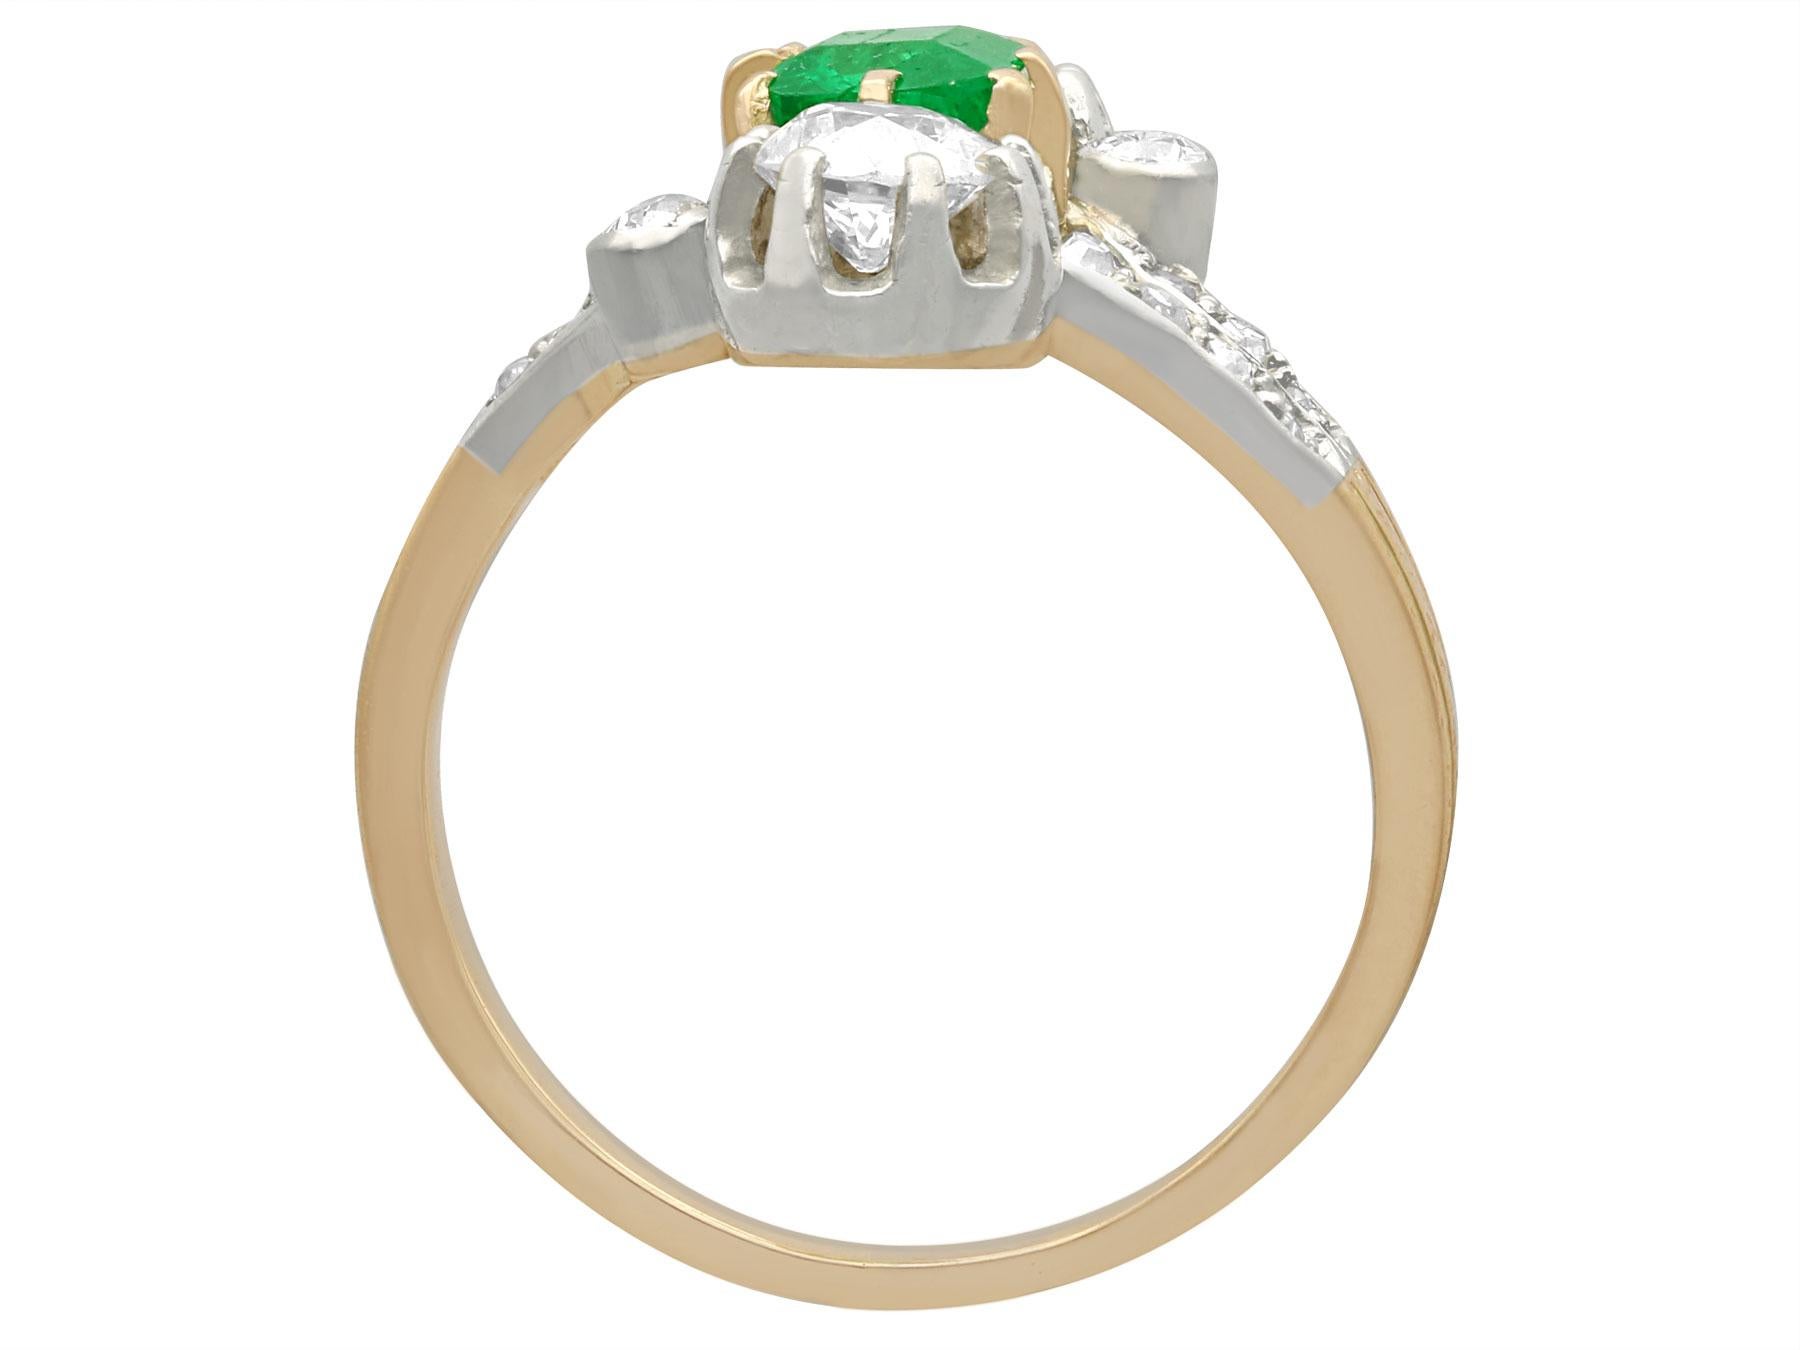 Antique 1880s 1.12 Carat Diamond and Emerald Yellow Gold Silver Set Twist Ring In Excellent Condition For Sale In Jesmond, Newcastle Upon Tyne